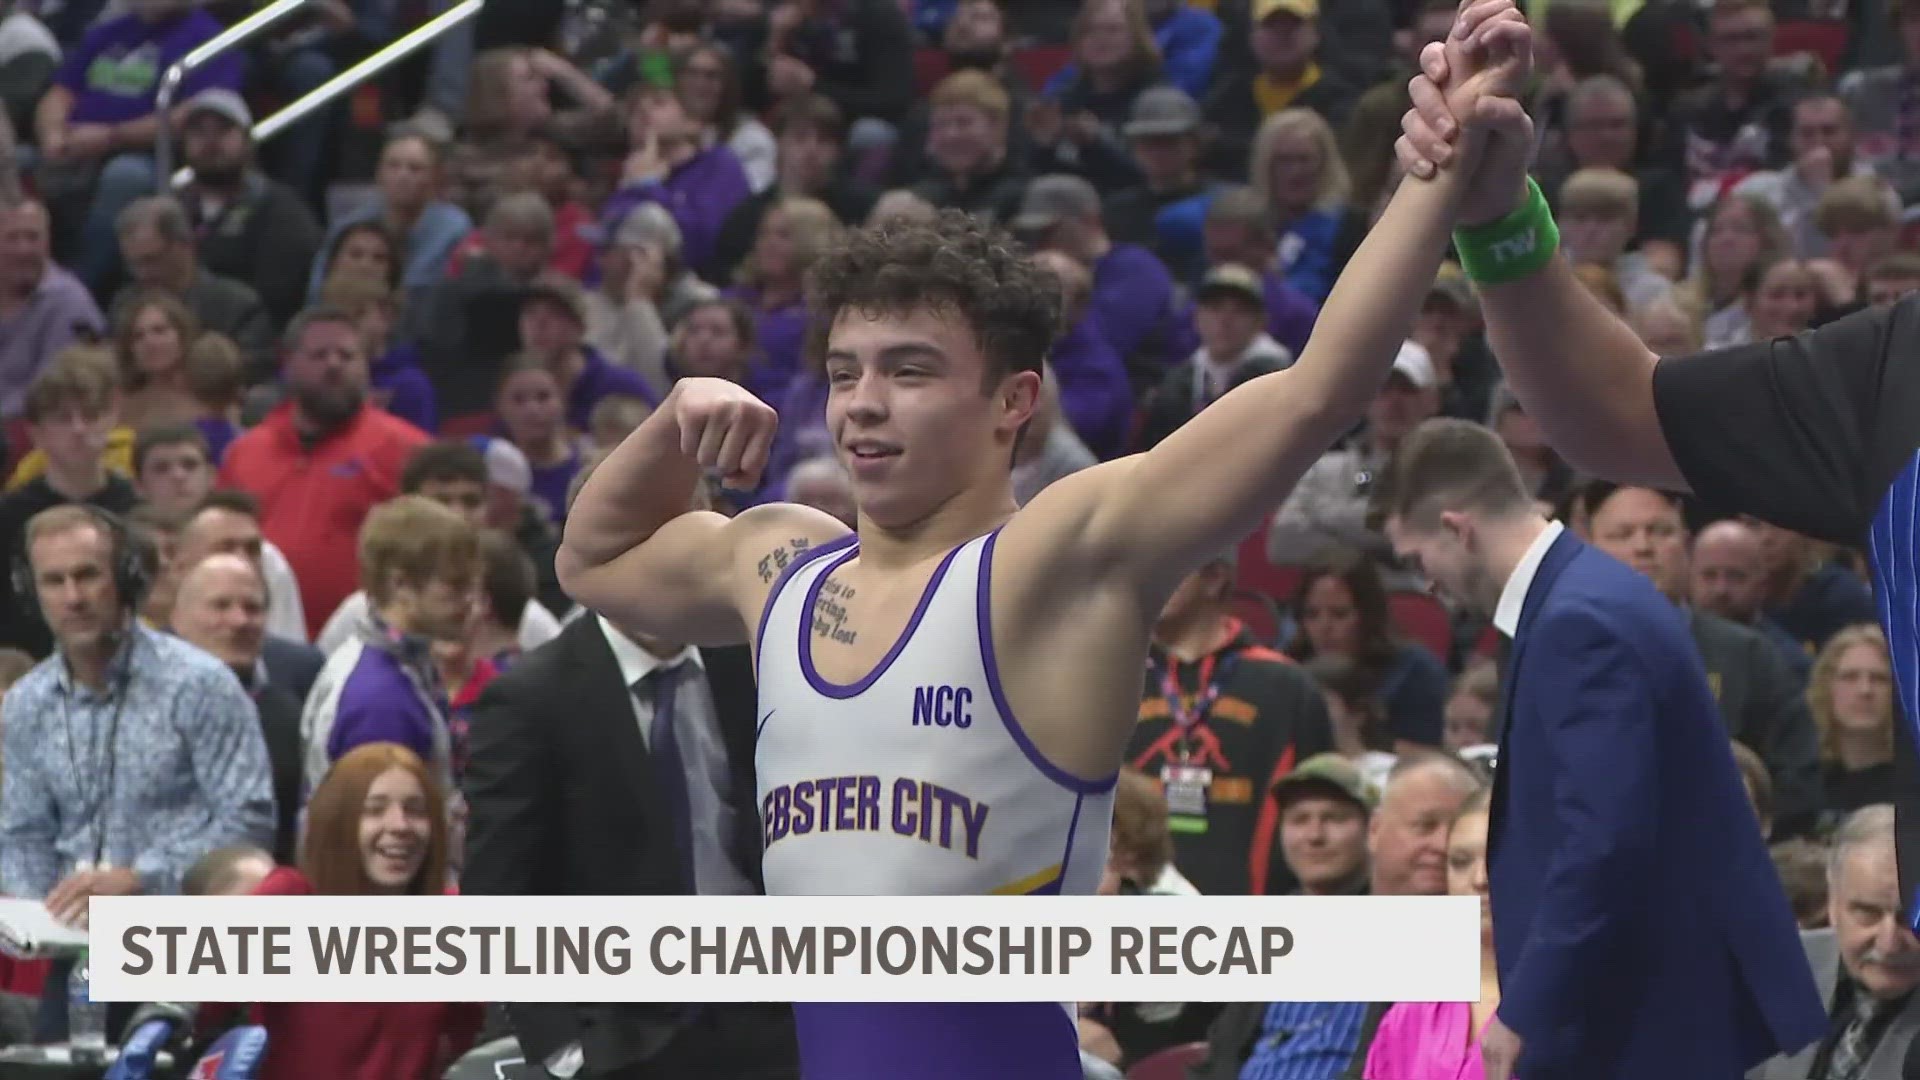 More than 20 local wrestlers competed for a state championship on Saturday at Wells Fargo Arena.